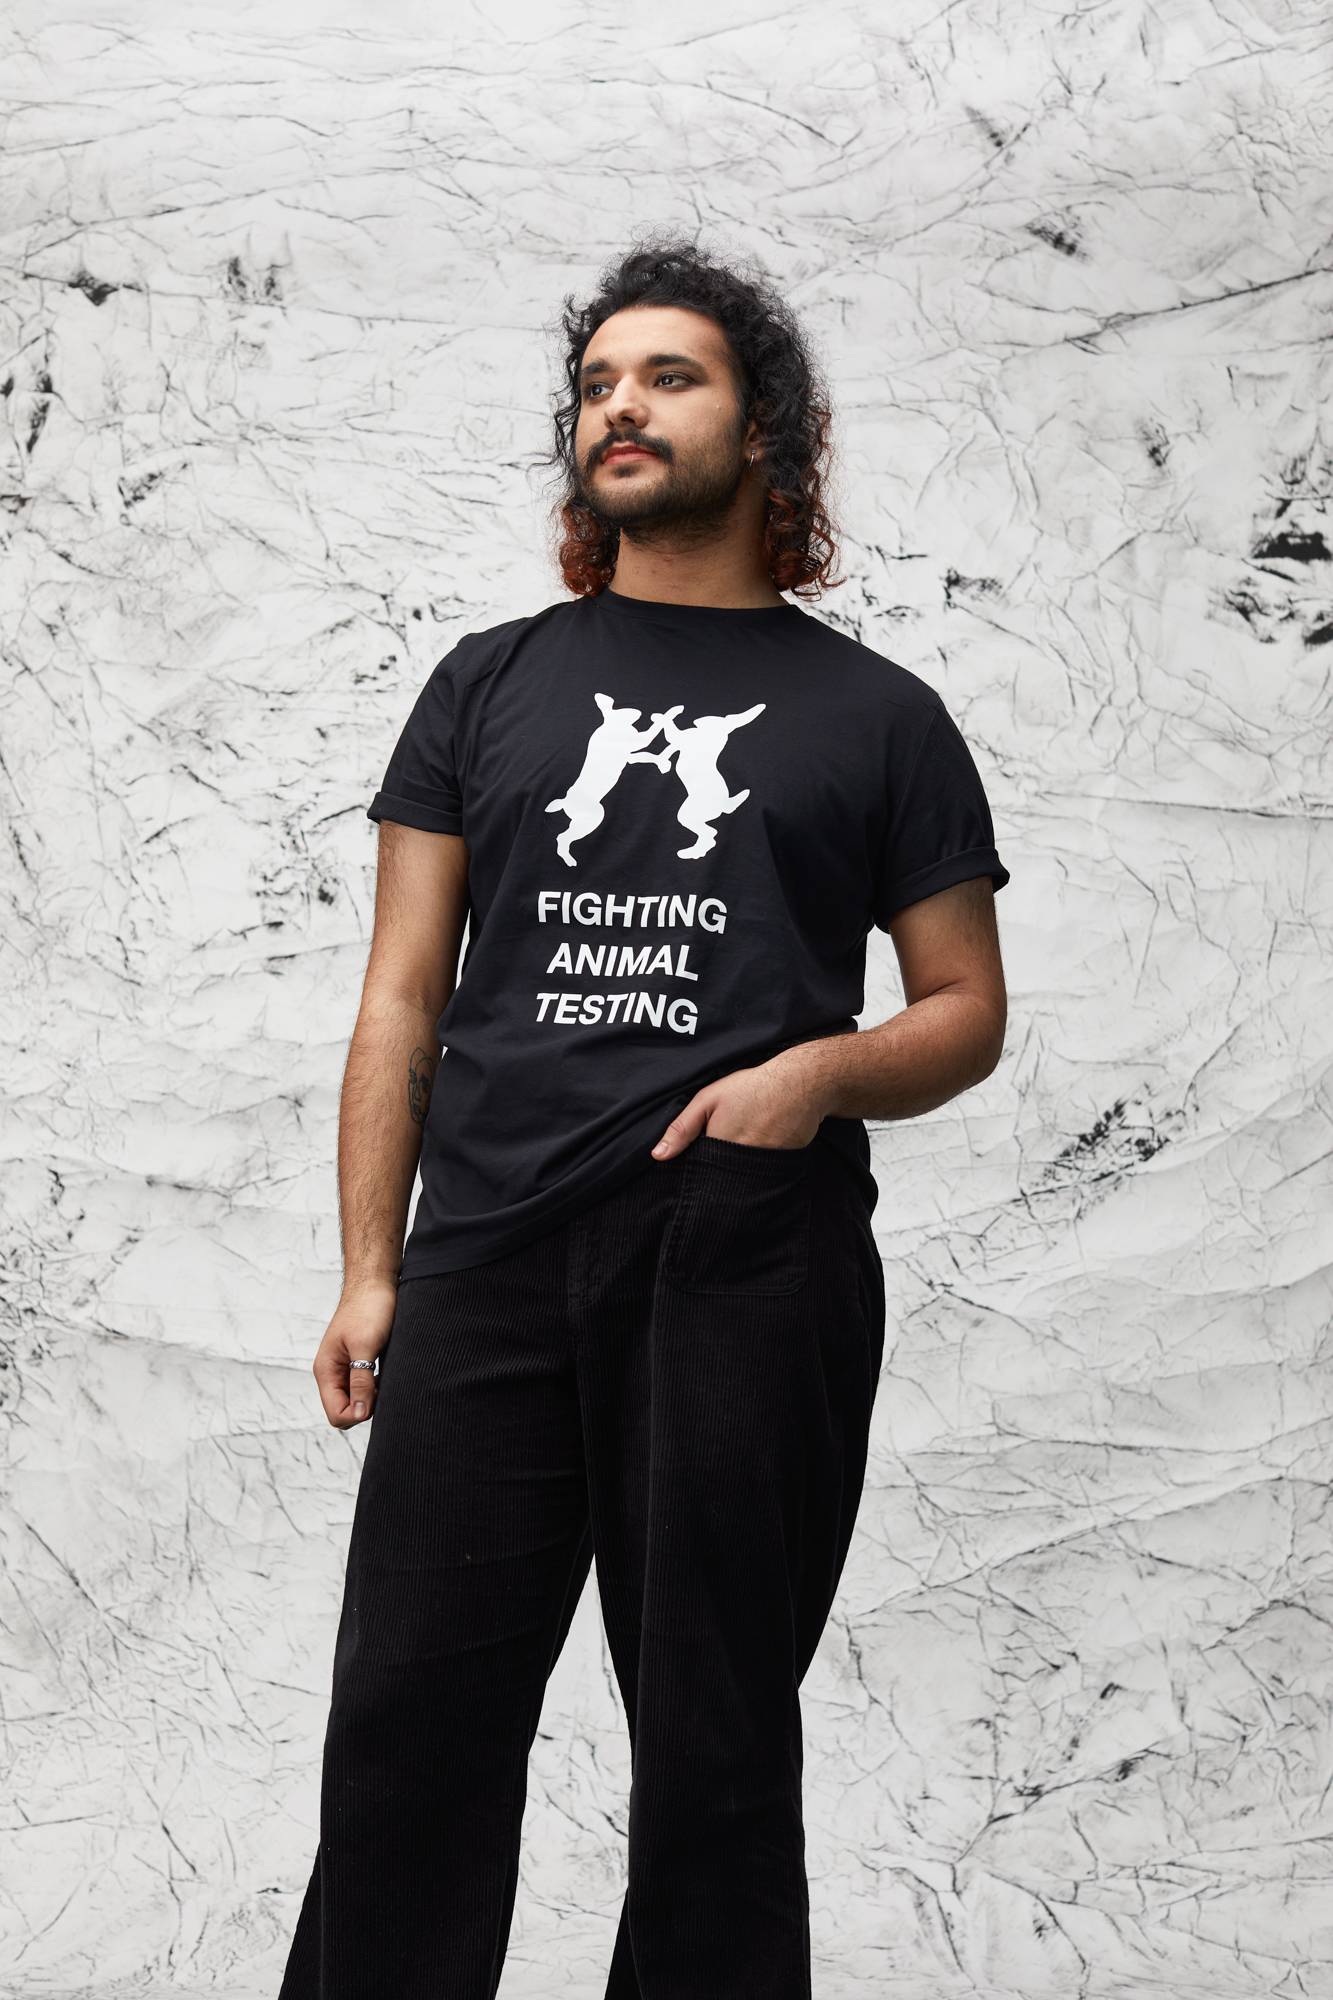 Model stands in front of marbled background wearing the t-shirt with black trousers.